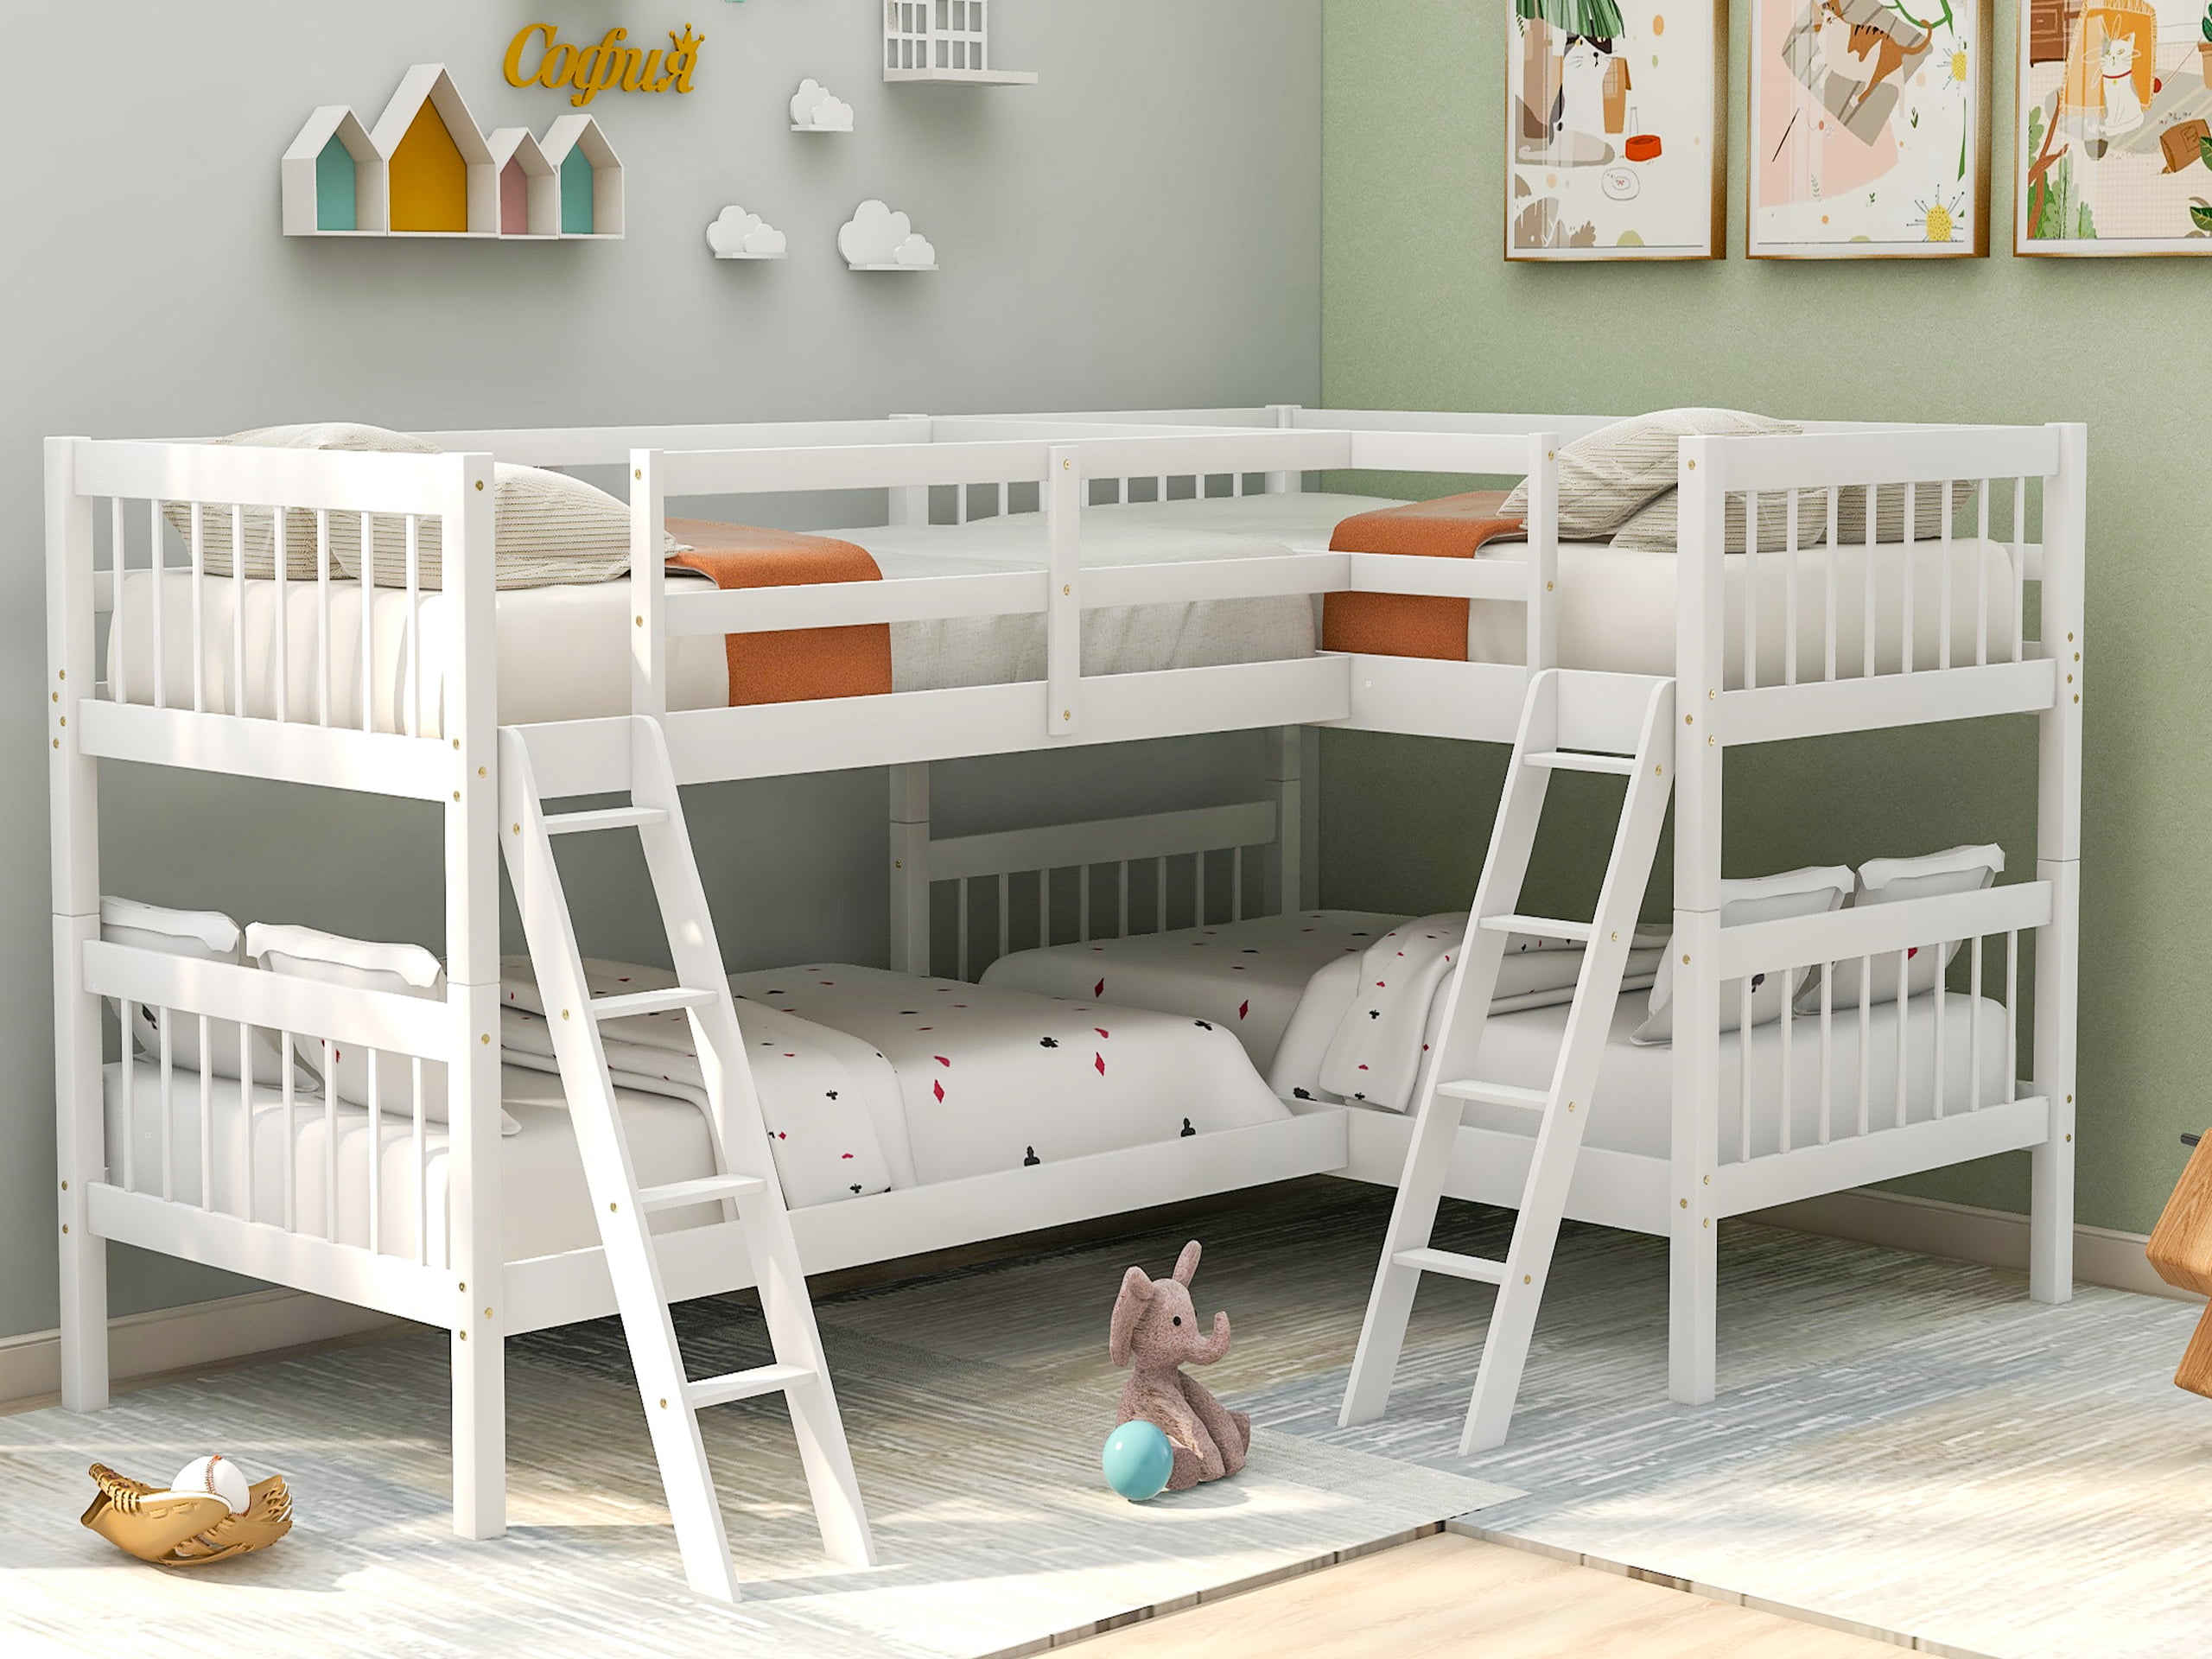 twin size mattresses for bunk beds